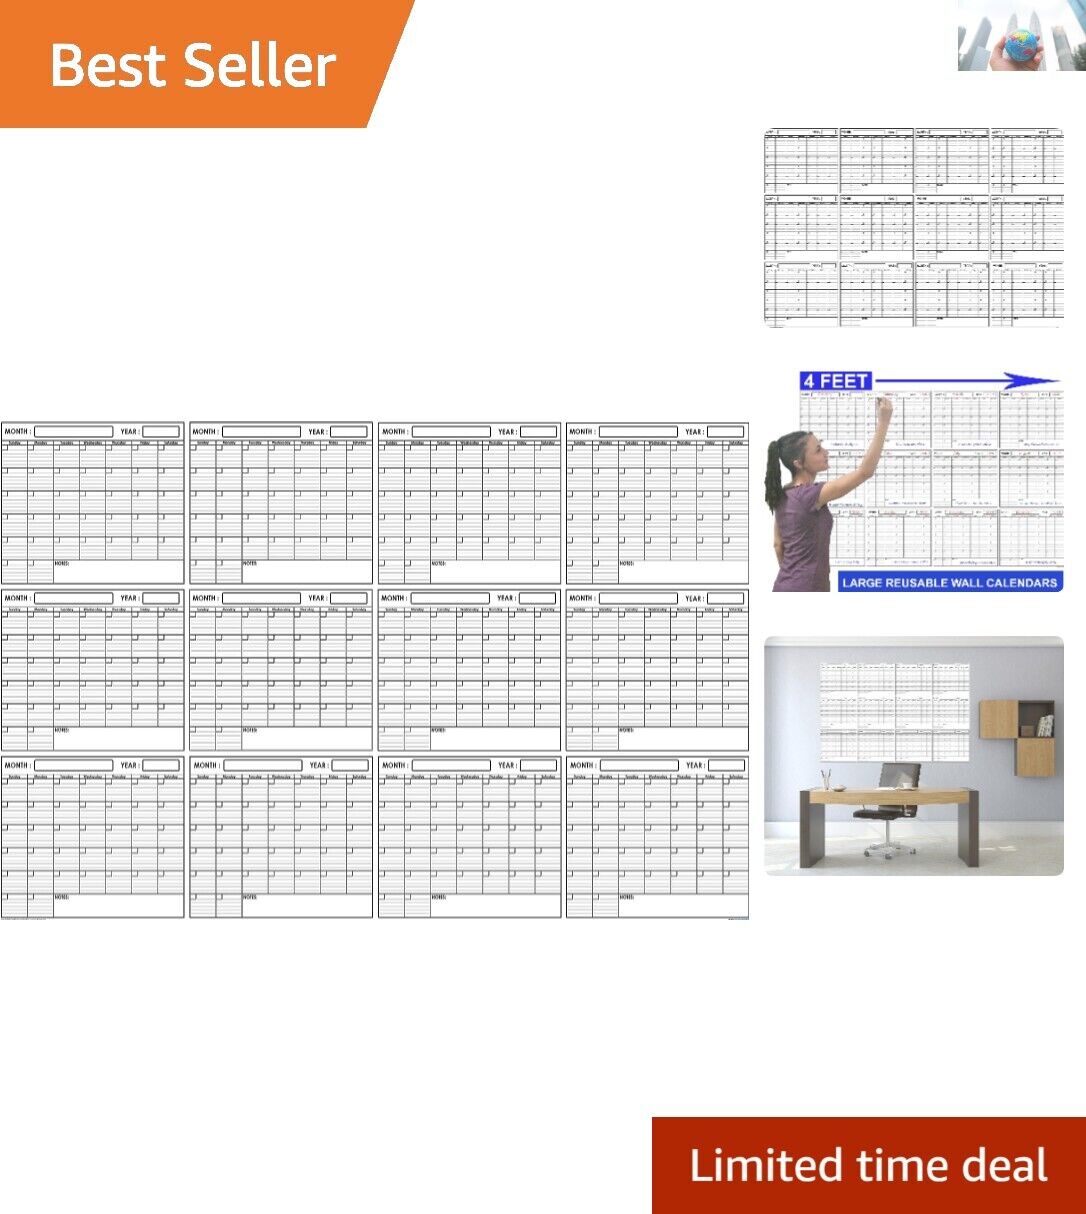 Efficient Dry Erase Yearly Planner - Large 36x48 Calendar Poster for Homes